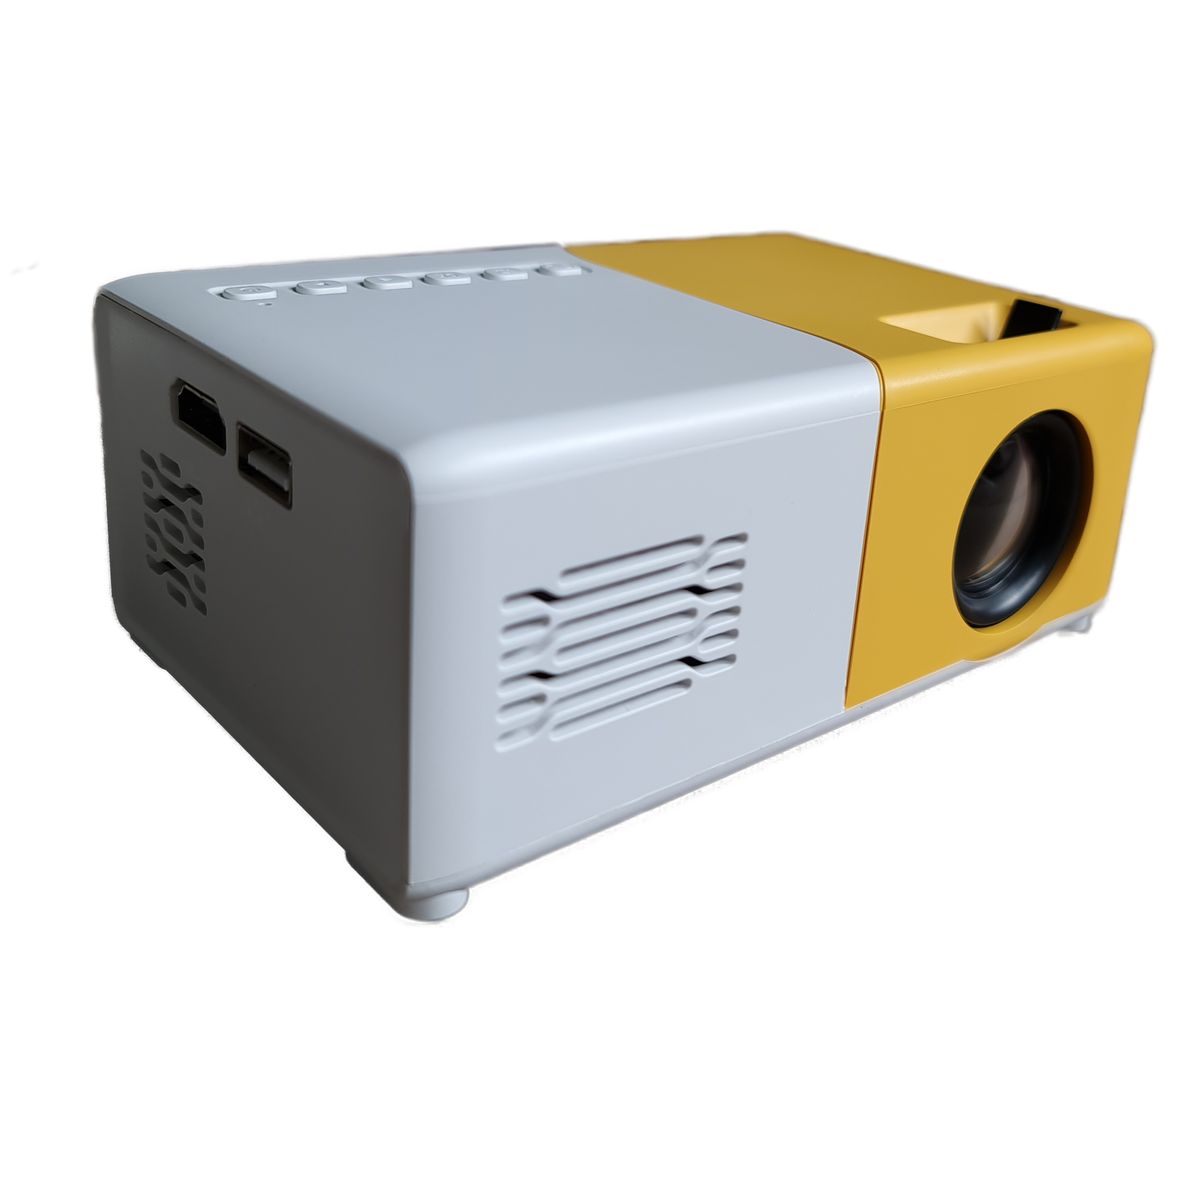 Mini Projector - 24" -60" Projection - TFT LCD imaging Technology